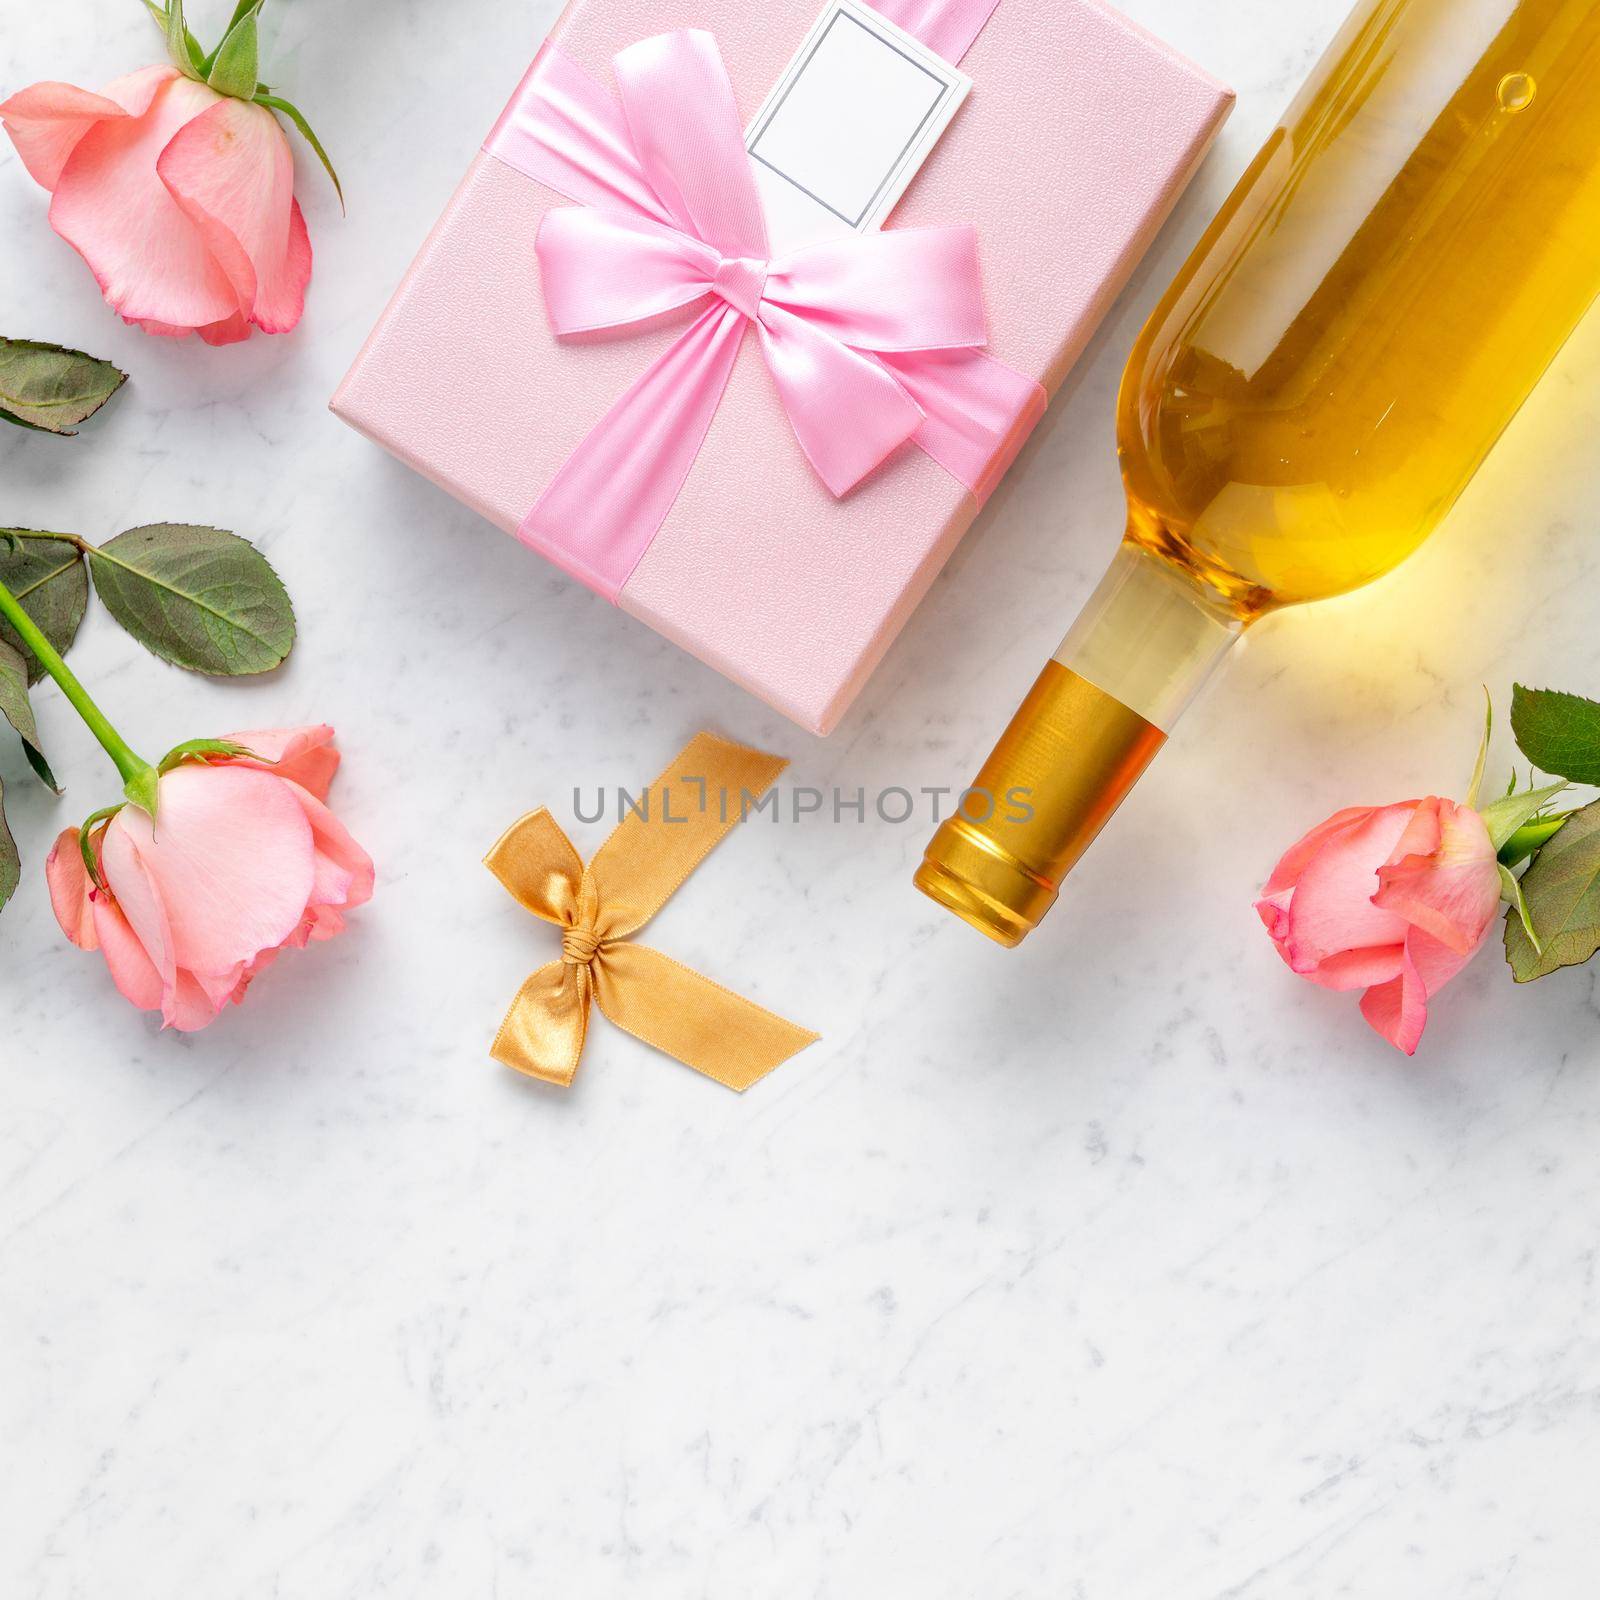 Giftbox and pink rose flower on marble white table background for Valentine's Day holiday gift design concept.